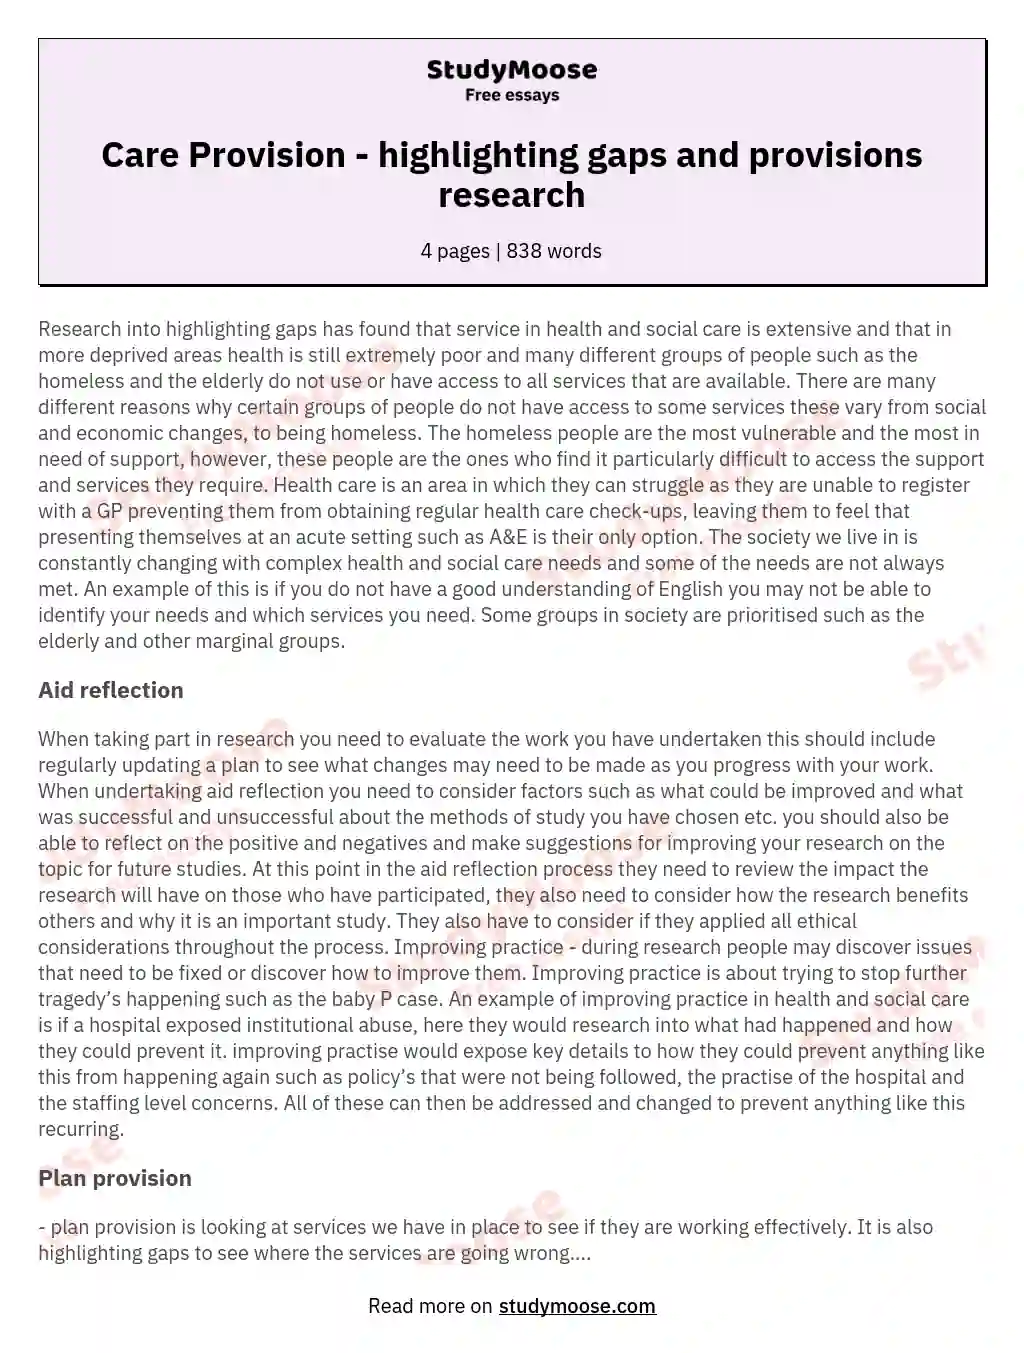 Care Provision - highlighting gaps and provisions research essay